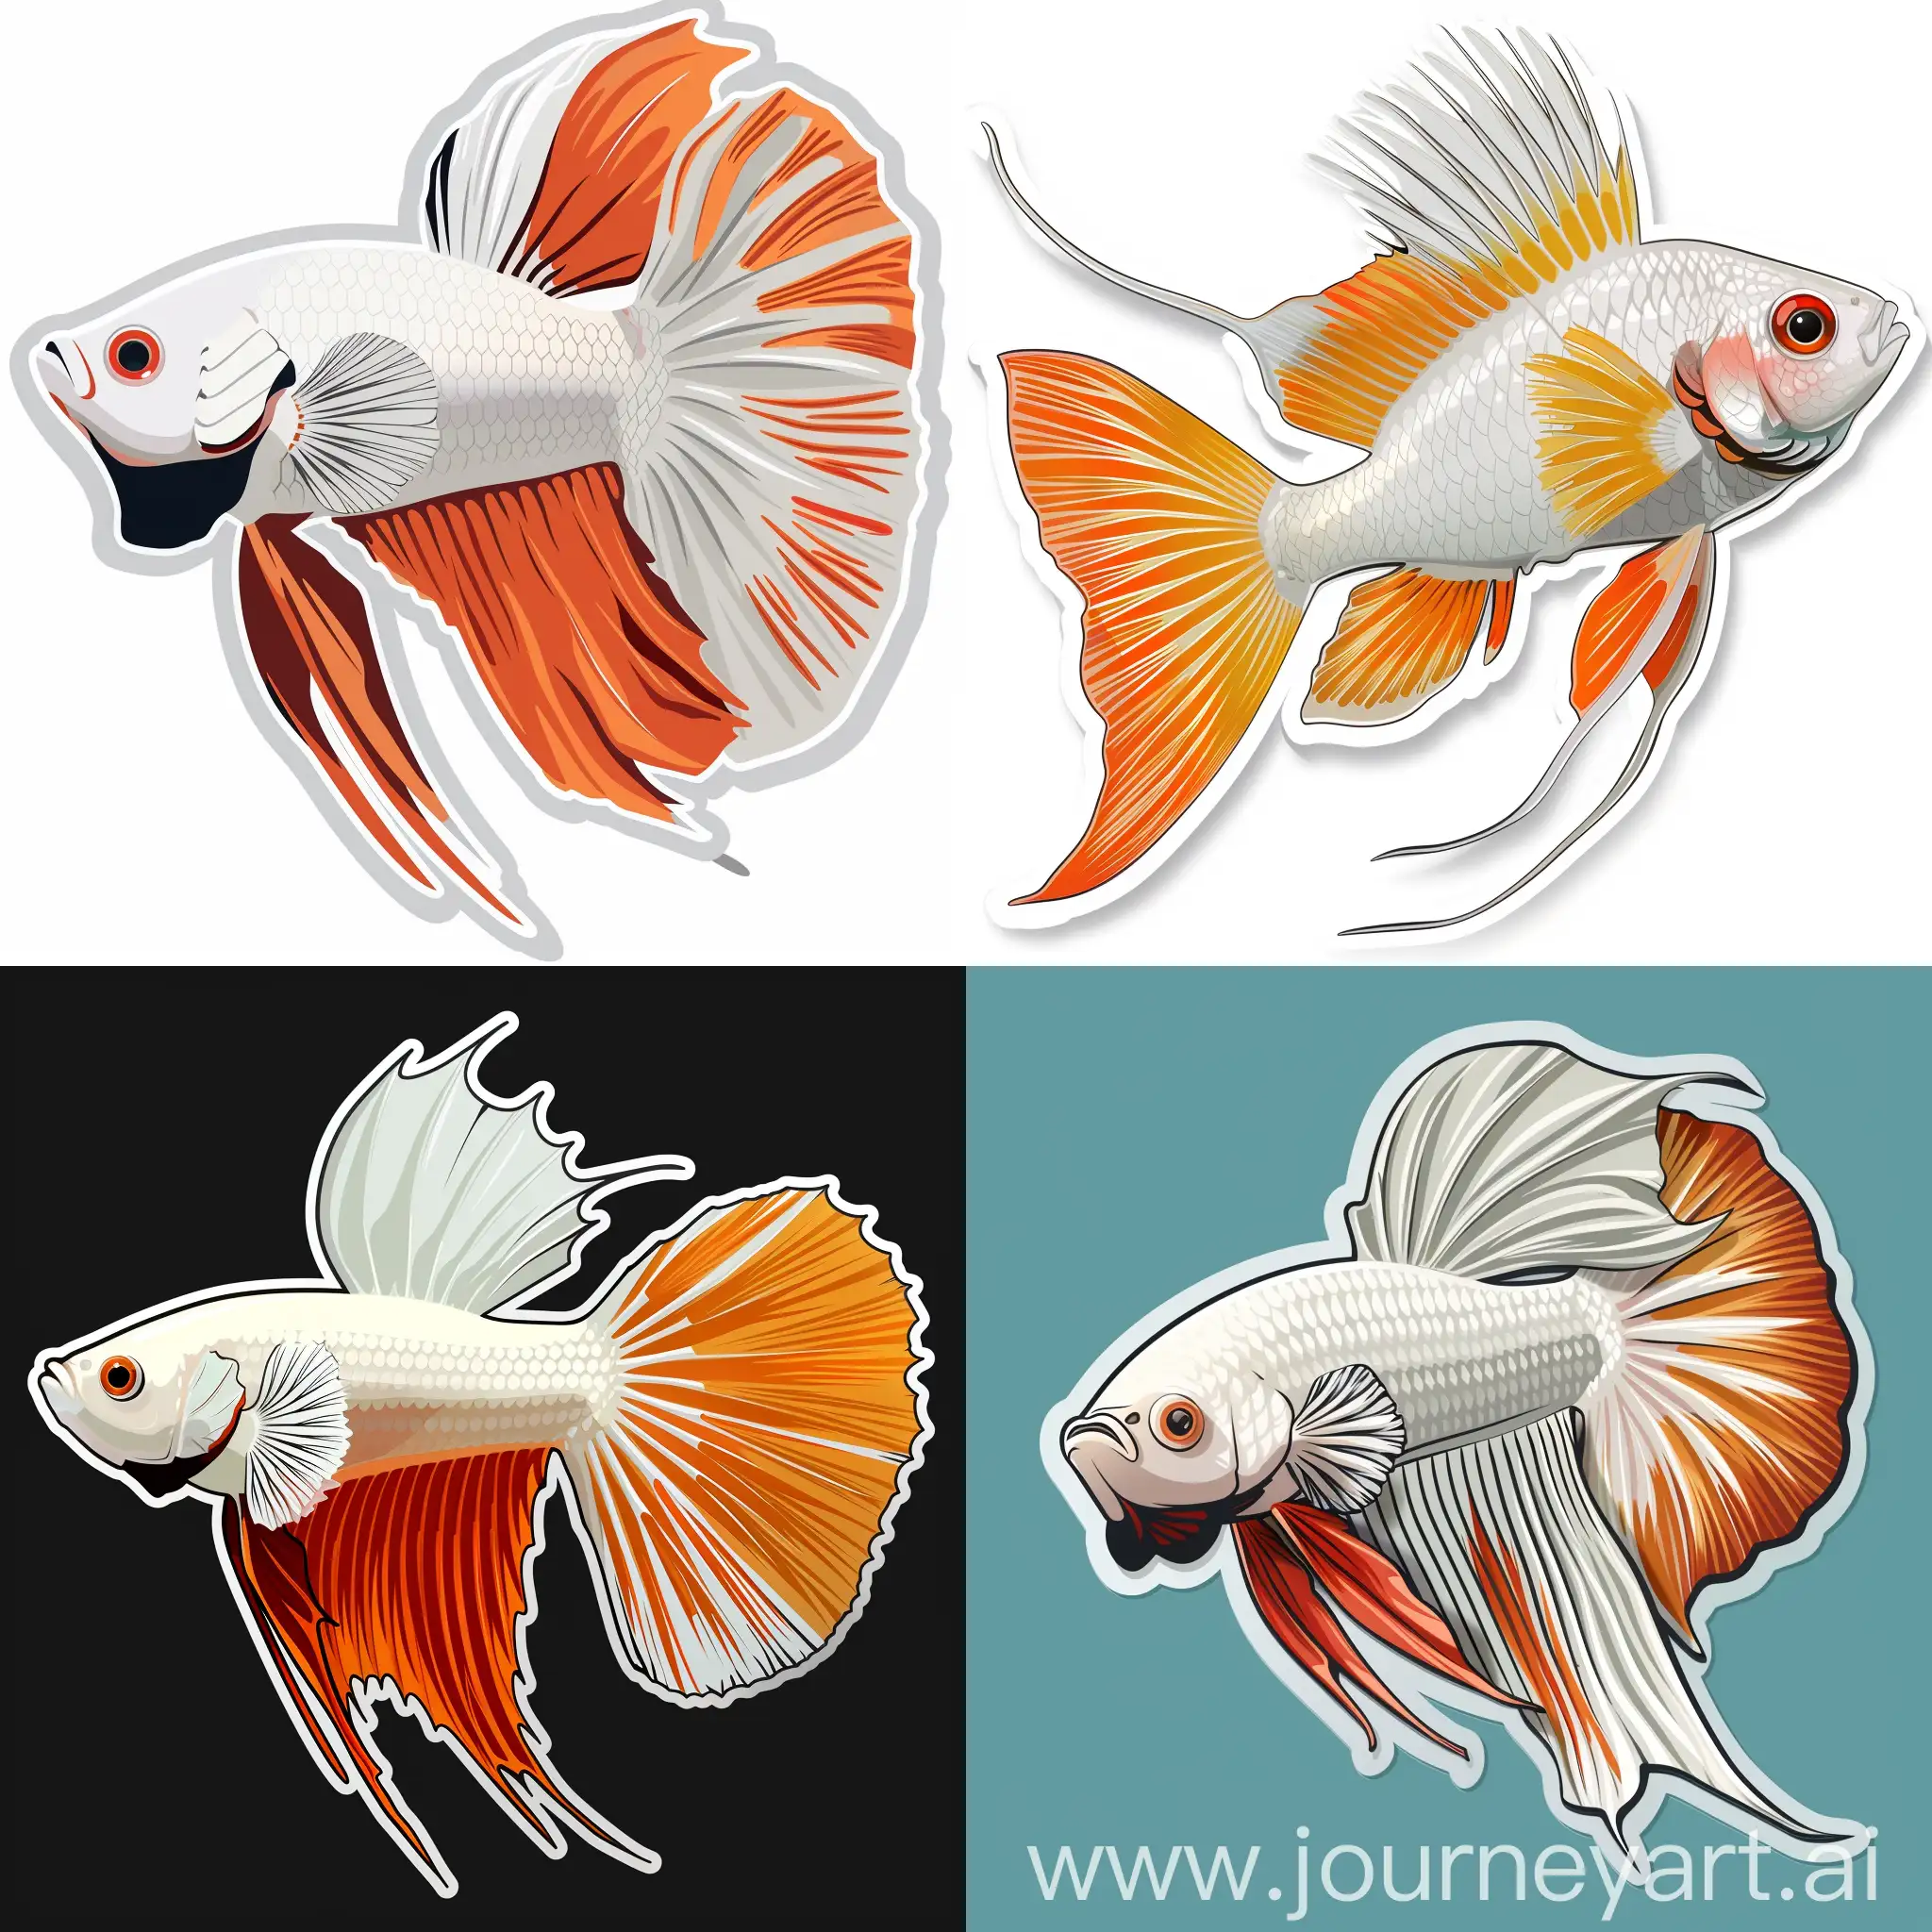 Colorful-Stereoscopic-Cartoon-Illustration-of-White-and-Orange-LongTailed-Fighting-Fish